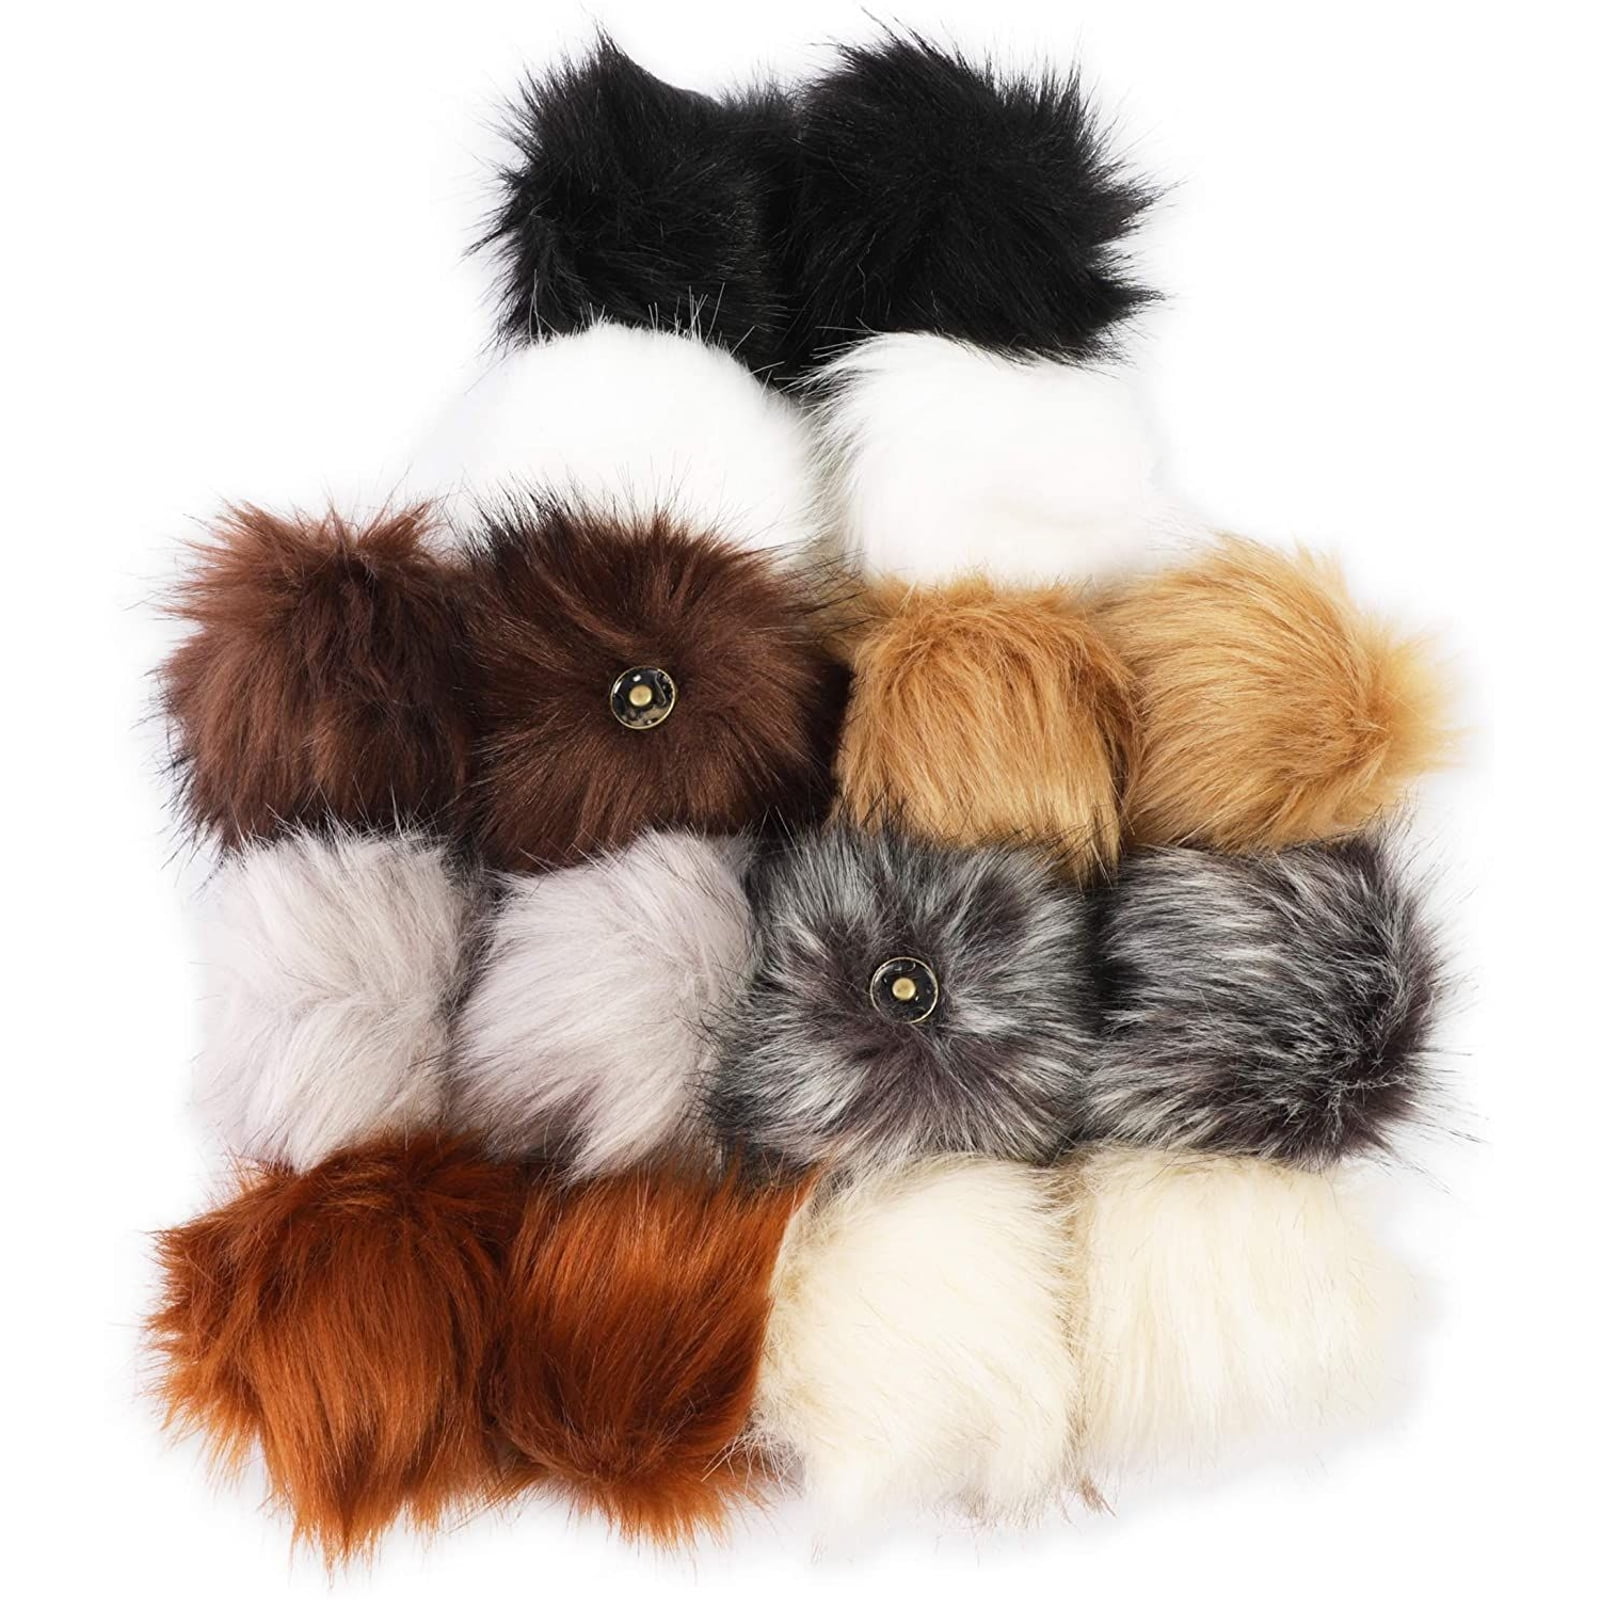 Fluffy Faux Fox Fur Pompom Ball with Press Button for Knitted Garment Hat DIY Handmade Accessories 5 Inches Pack of 12 Khaki